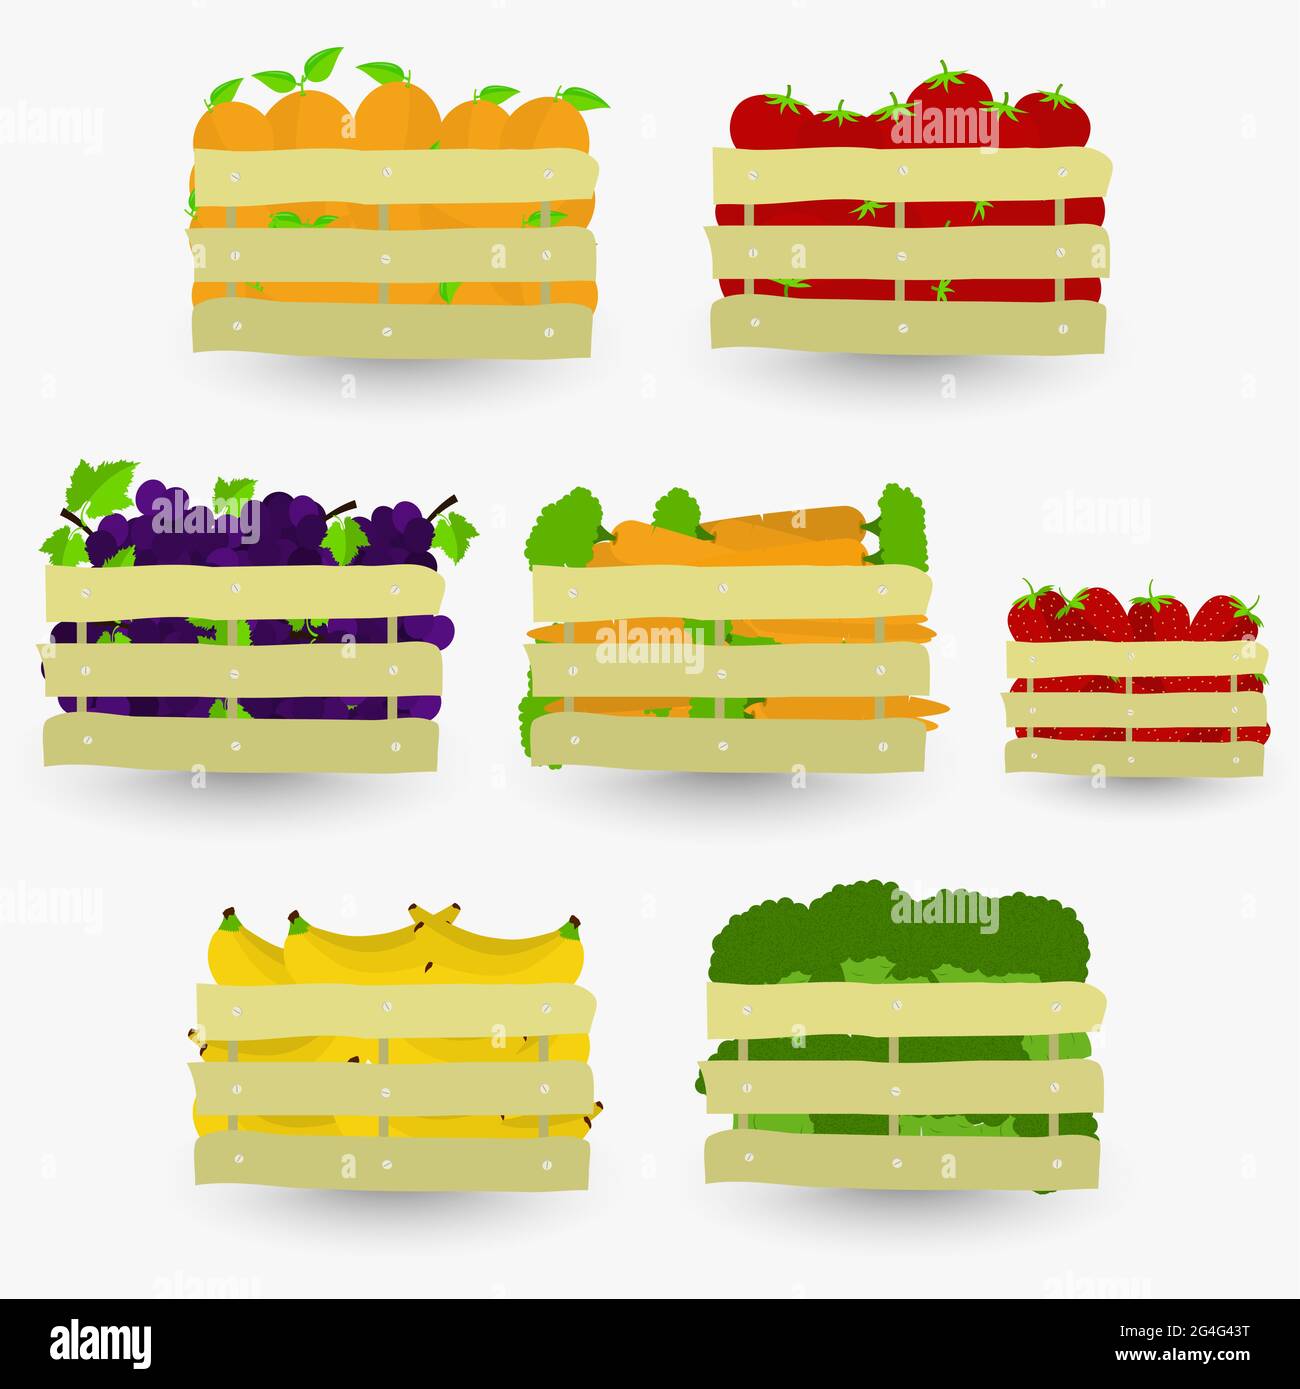 Farm fruit crate Stock Vector Images - Alamy